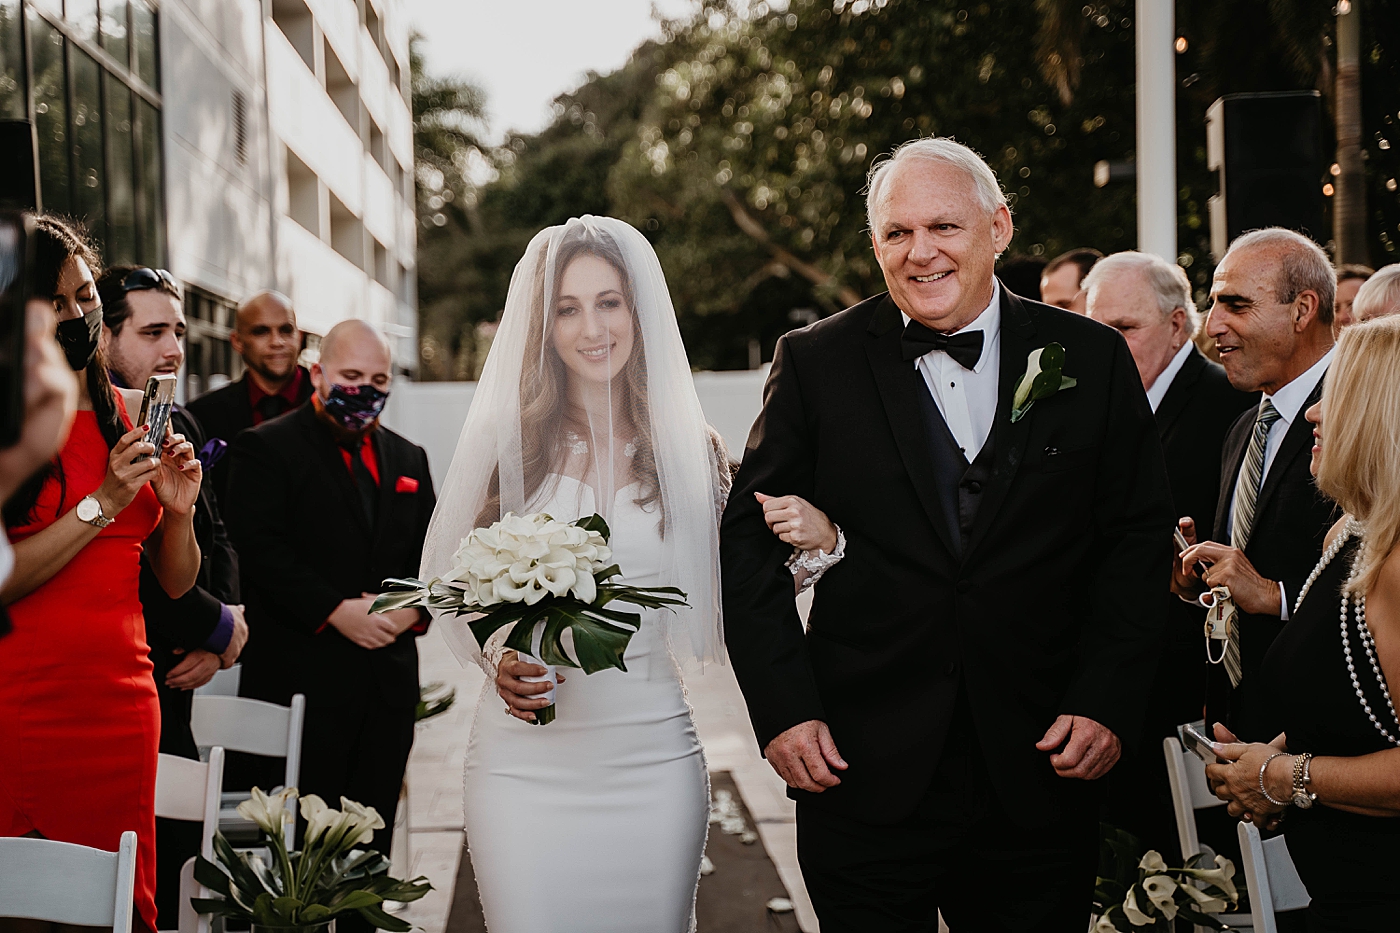 Bride coming down the aisle Waterstone Resort and Marina Wedding captured by South Florida Wedding Photographer Krystal Capone Photography